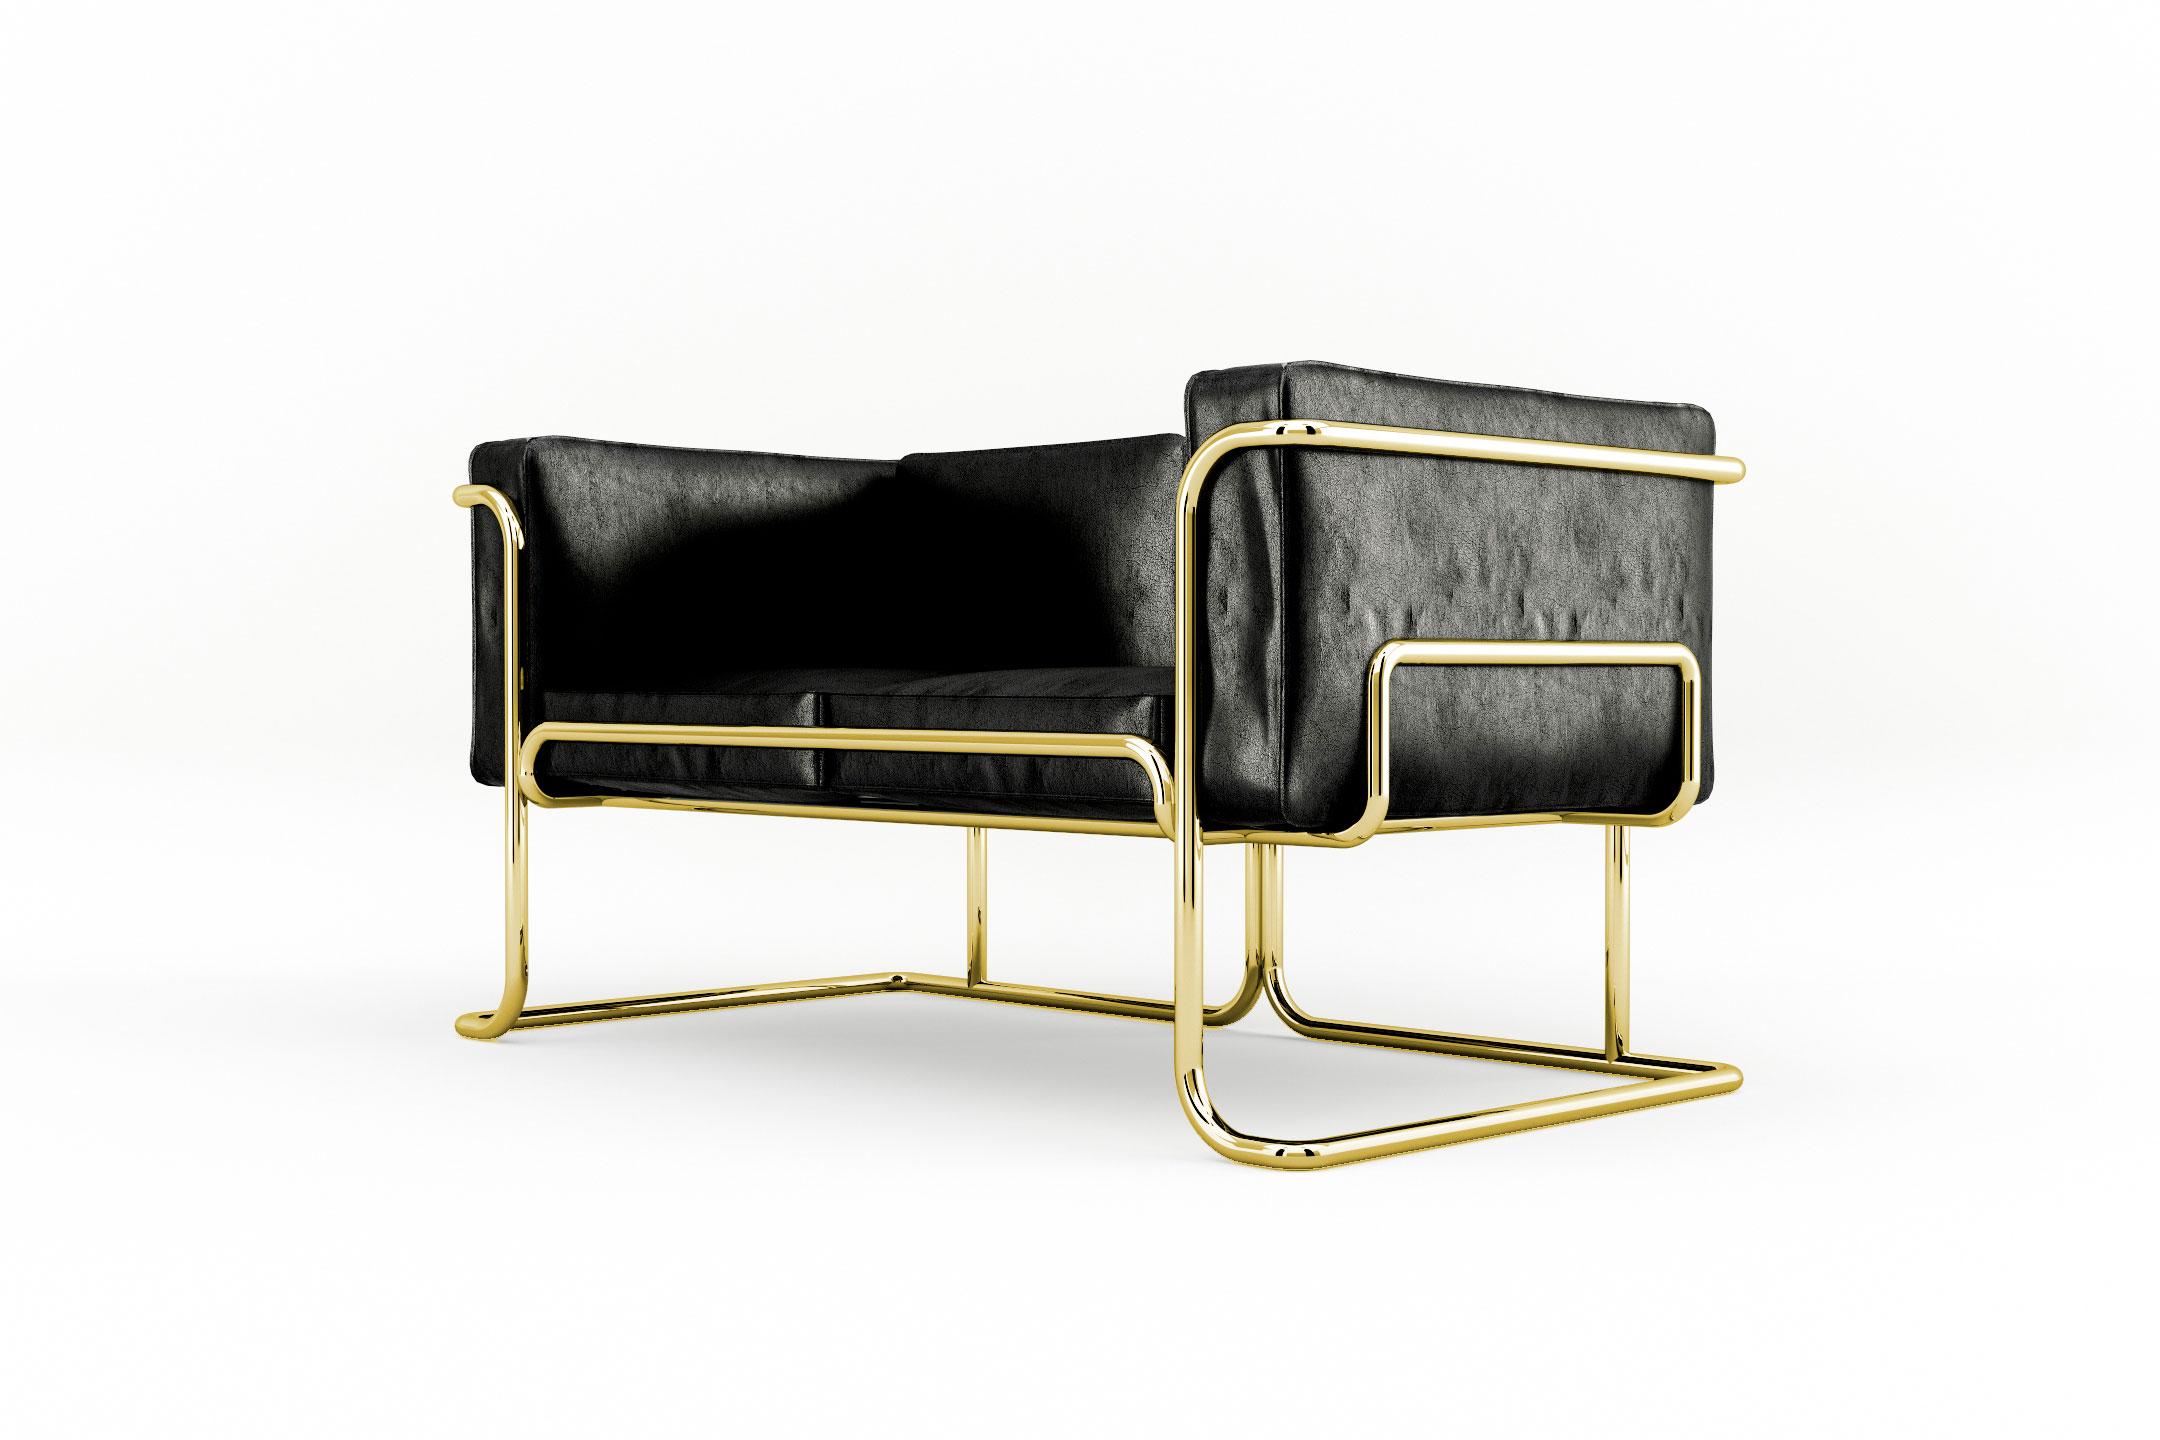 Lotus 2 Seat Sofa - Modern Black Leather Sofa with Brass Legs In New Condition For Sale In London, GB